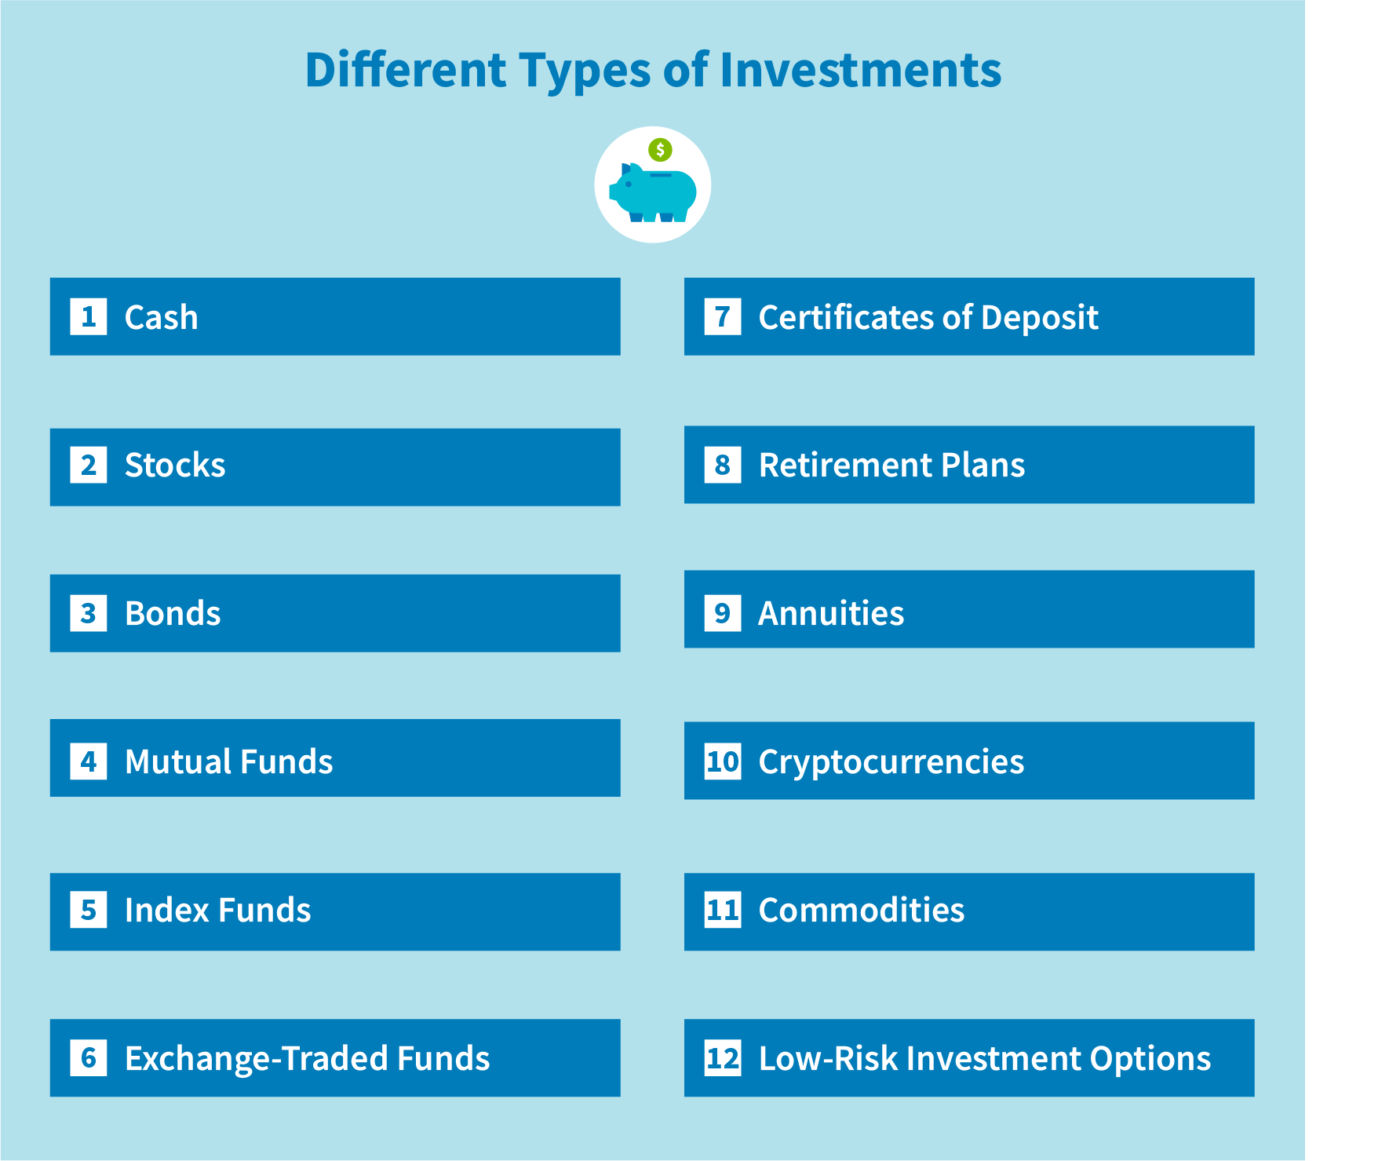 Different Types of Investments